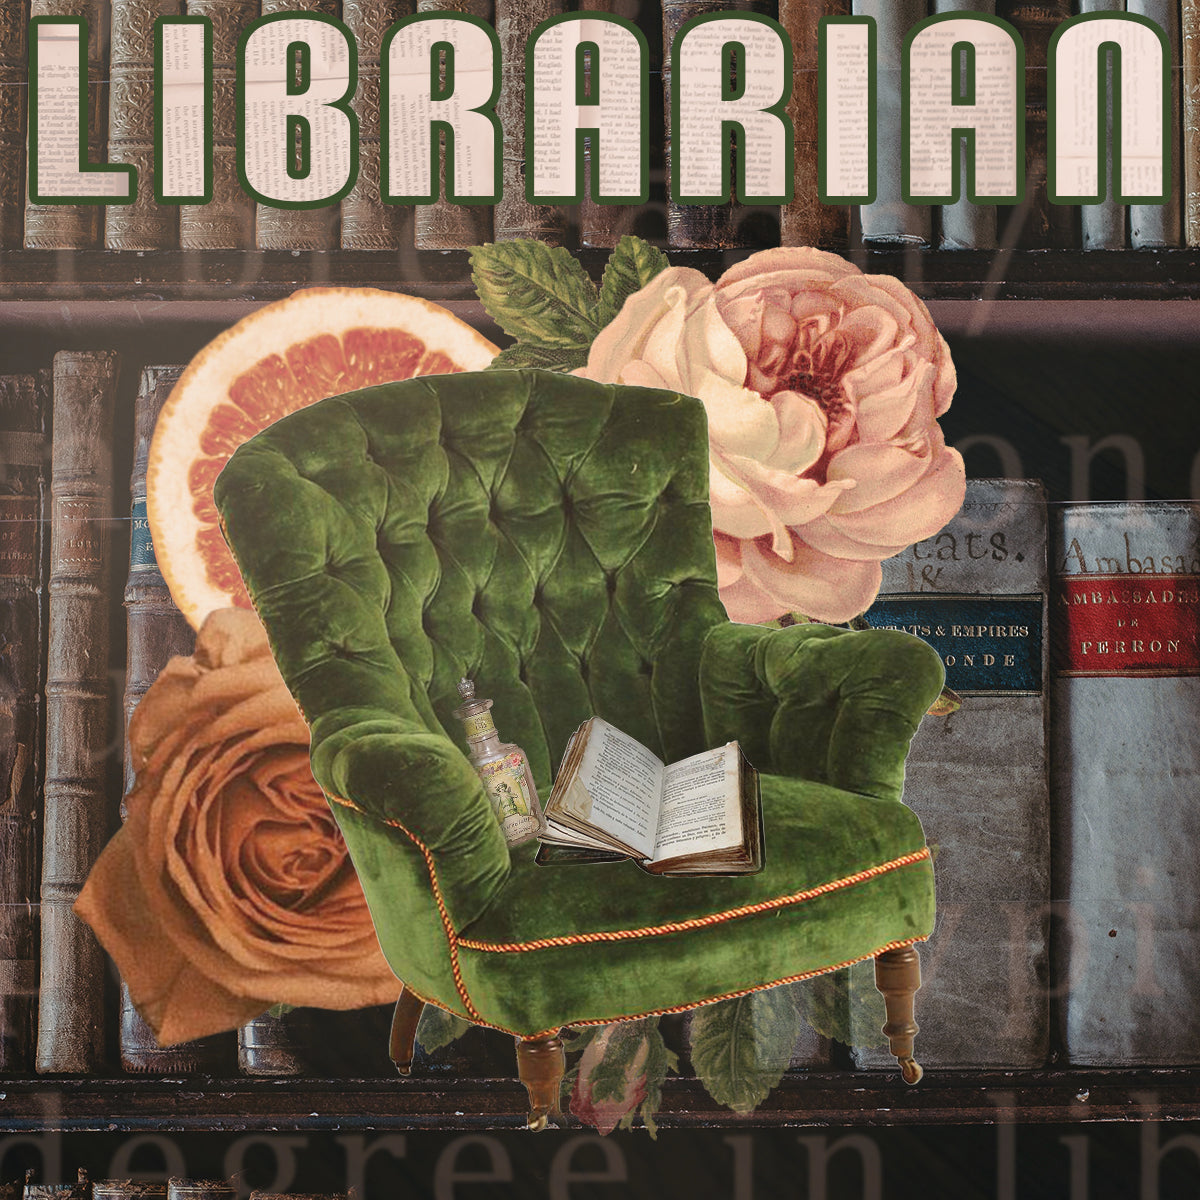 Librarian - Stereoplasm